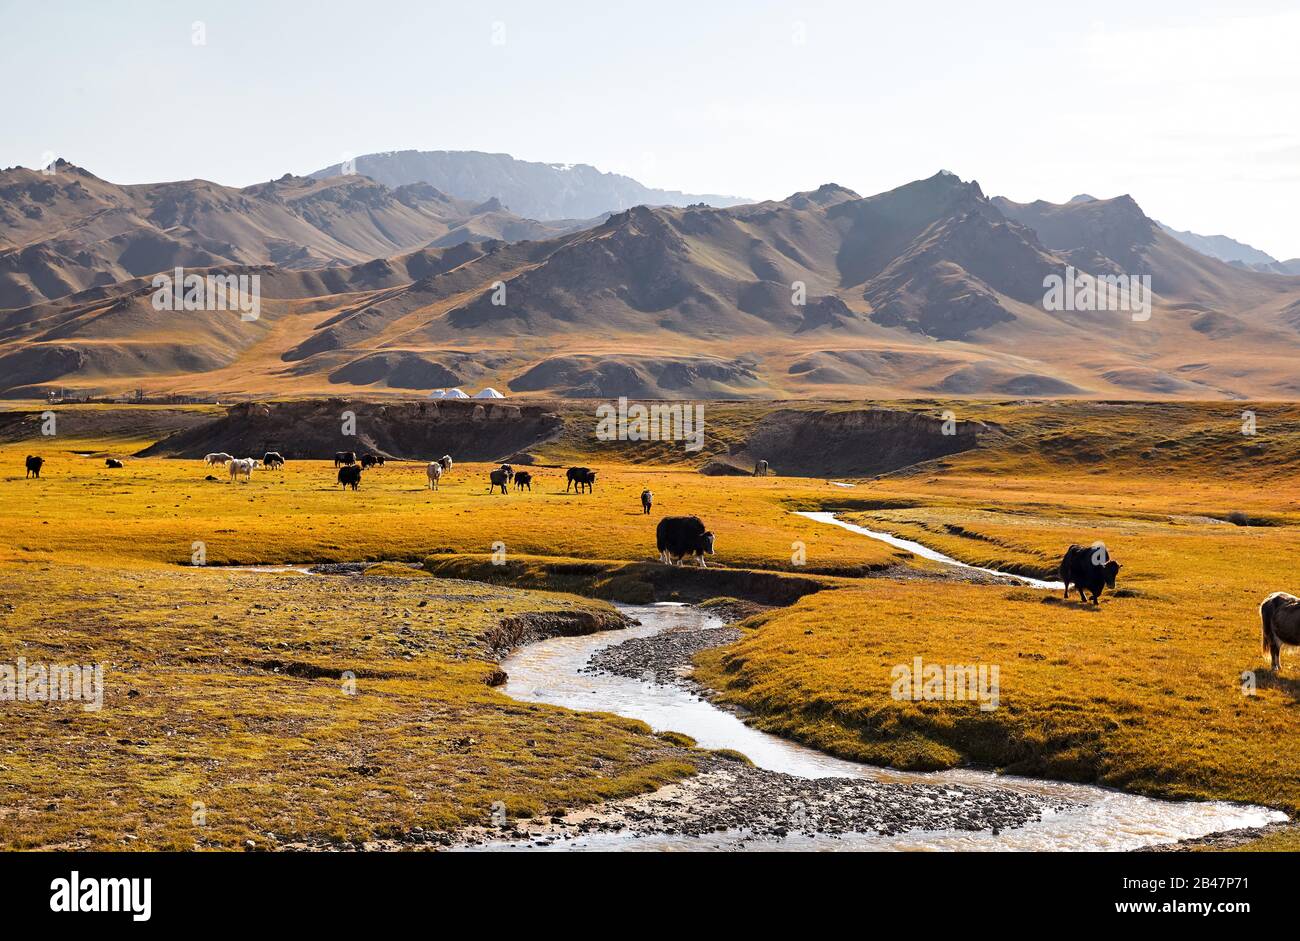 Herd of Yak crossing eating grass near the river in the mountain valley of Kyrgyzstan, Central Asia Stock Photo